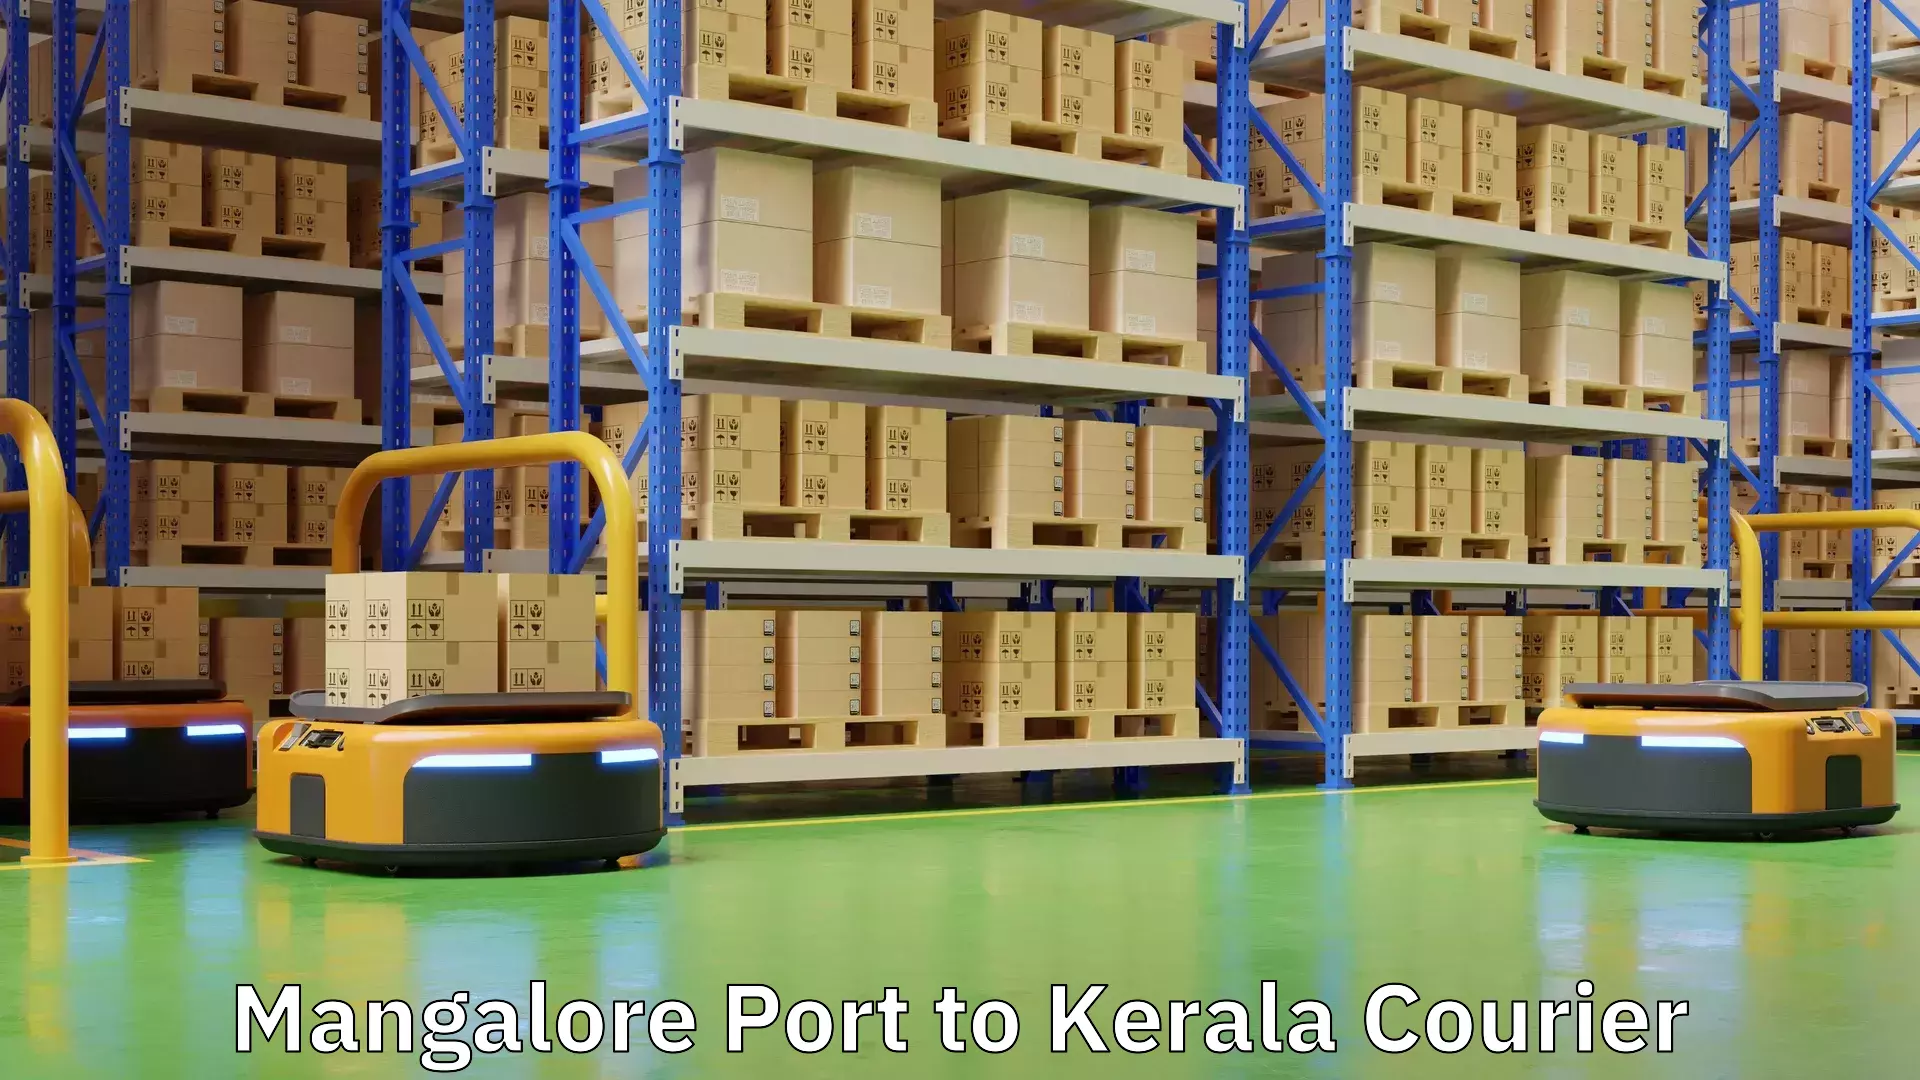 Supply chain delivery Mangalore Port to Kerala